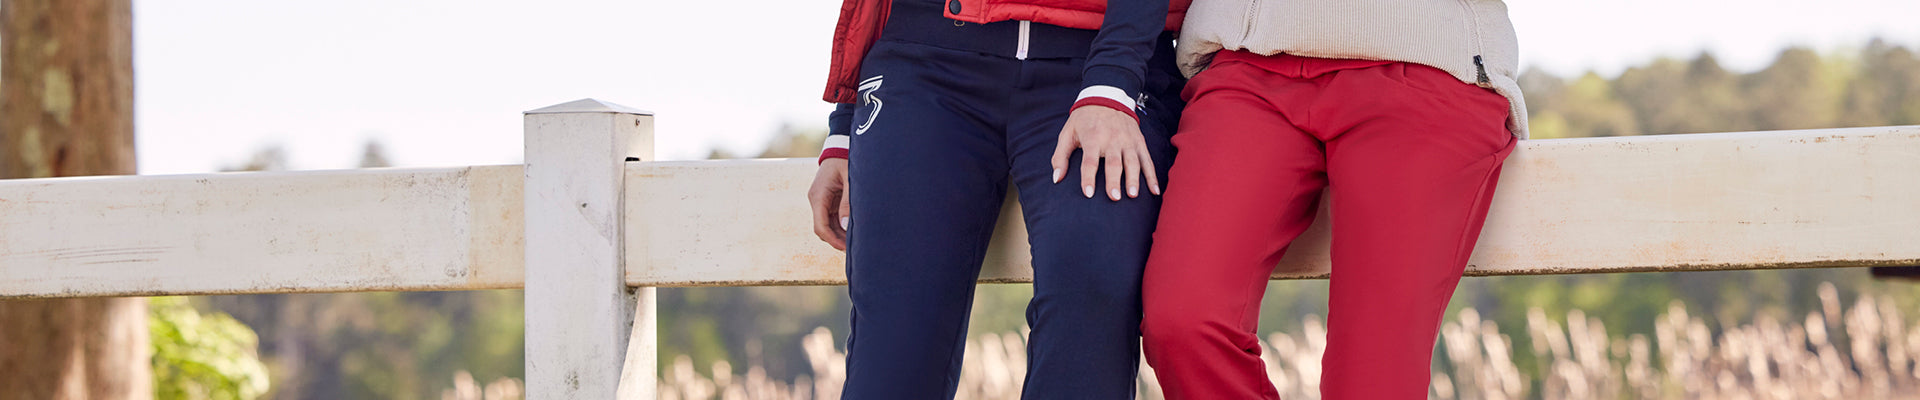 The U.S Polo Assn. women's leggings are an essential item for your wardrobe. The comfortable classics provide support , whilst allowing for ease of movement from the stretchy breathable fabric. Available in plain graphic or velour styles for added style.